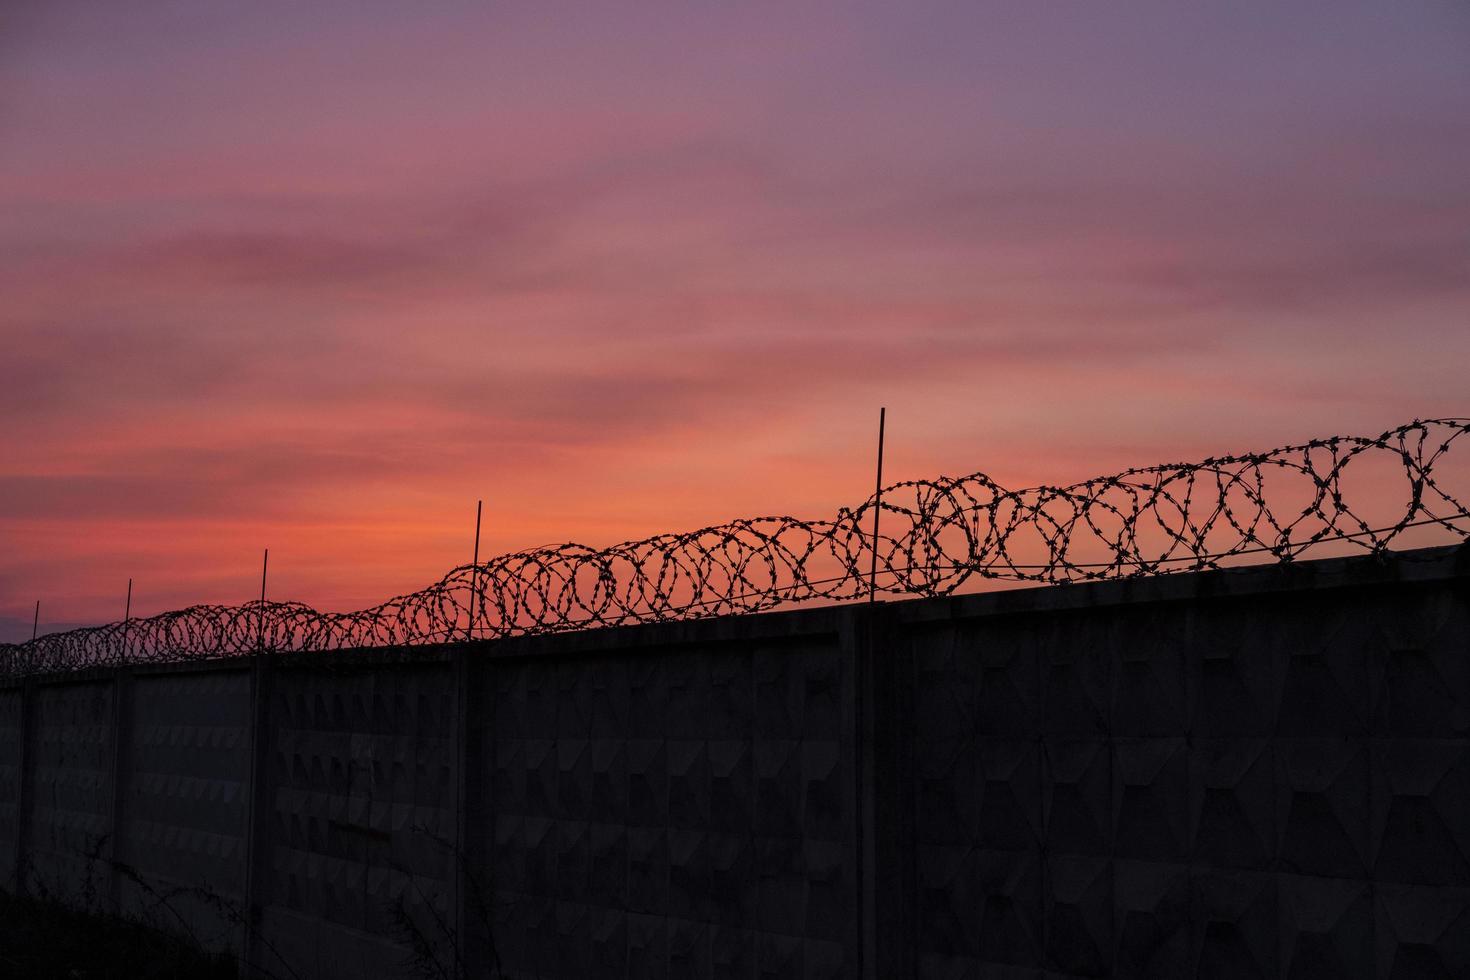 silhouette of barbed wire against sunset sky photo